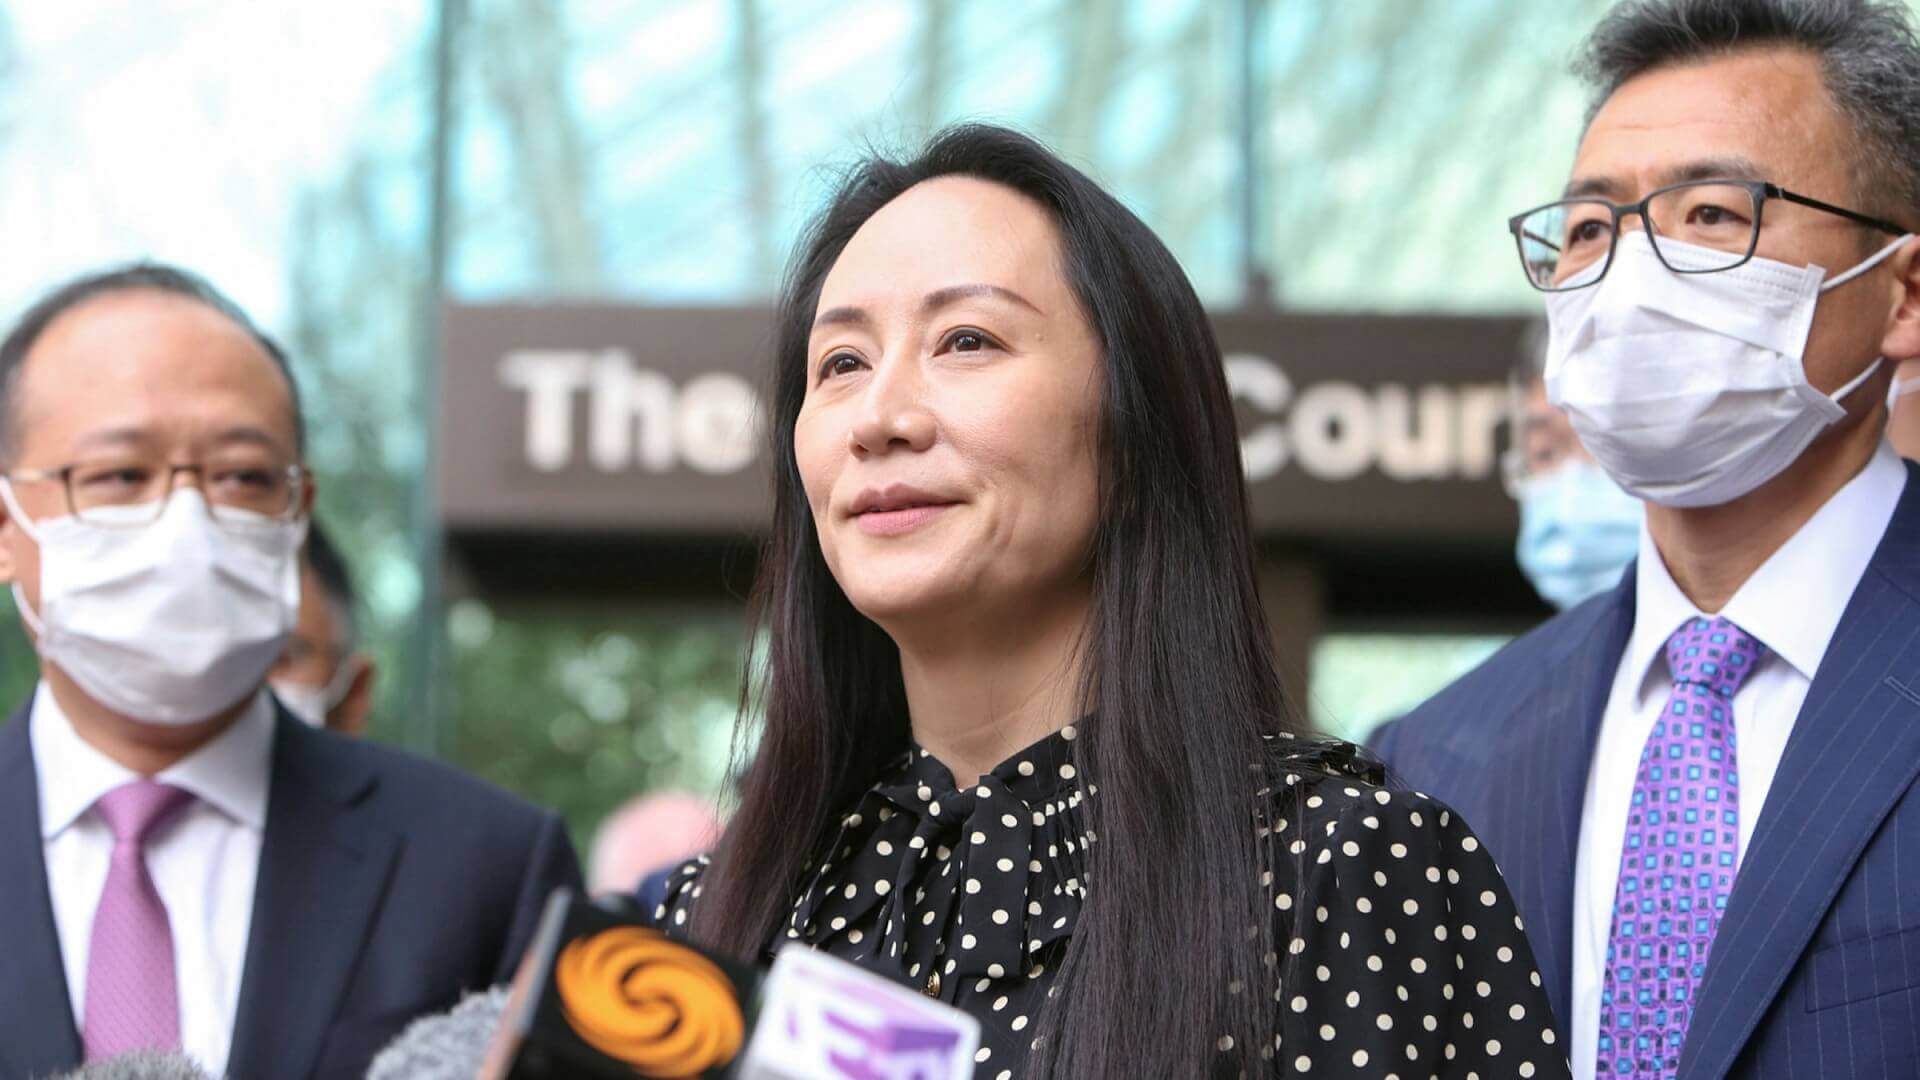 US Drops Remaining Financial Fraud Charges Against Huawei CFO Meng Wanzhou